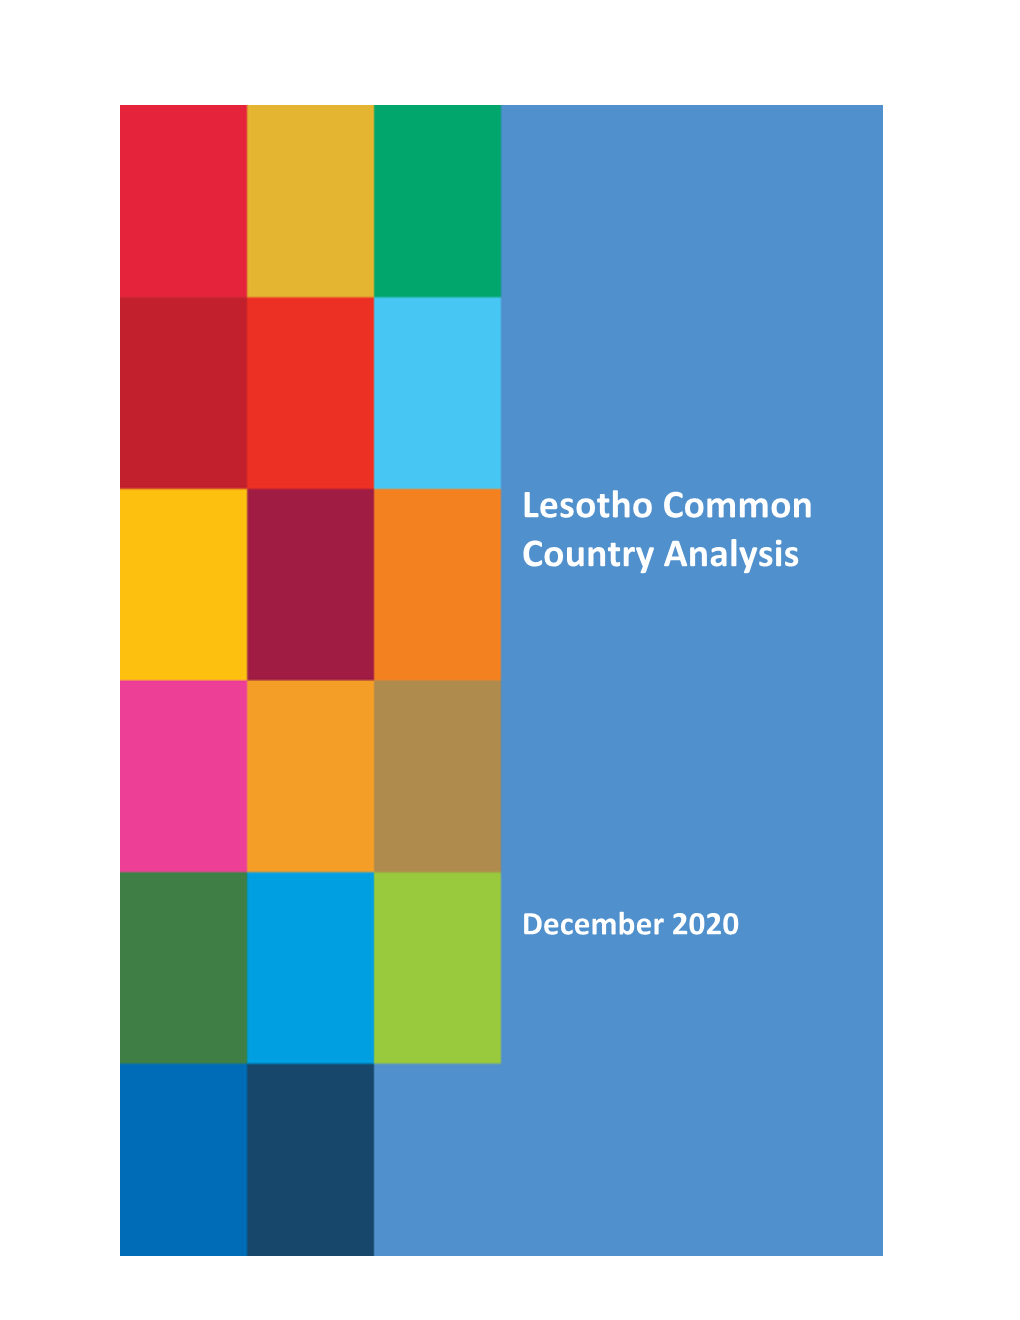 Lesotho Common Country Analysis